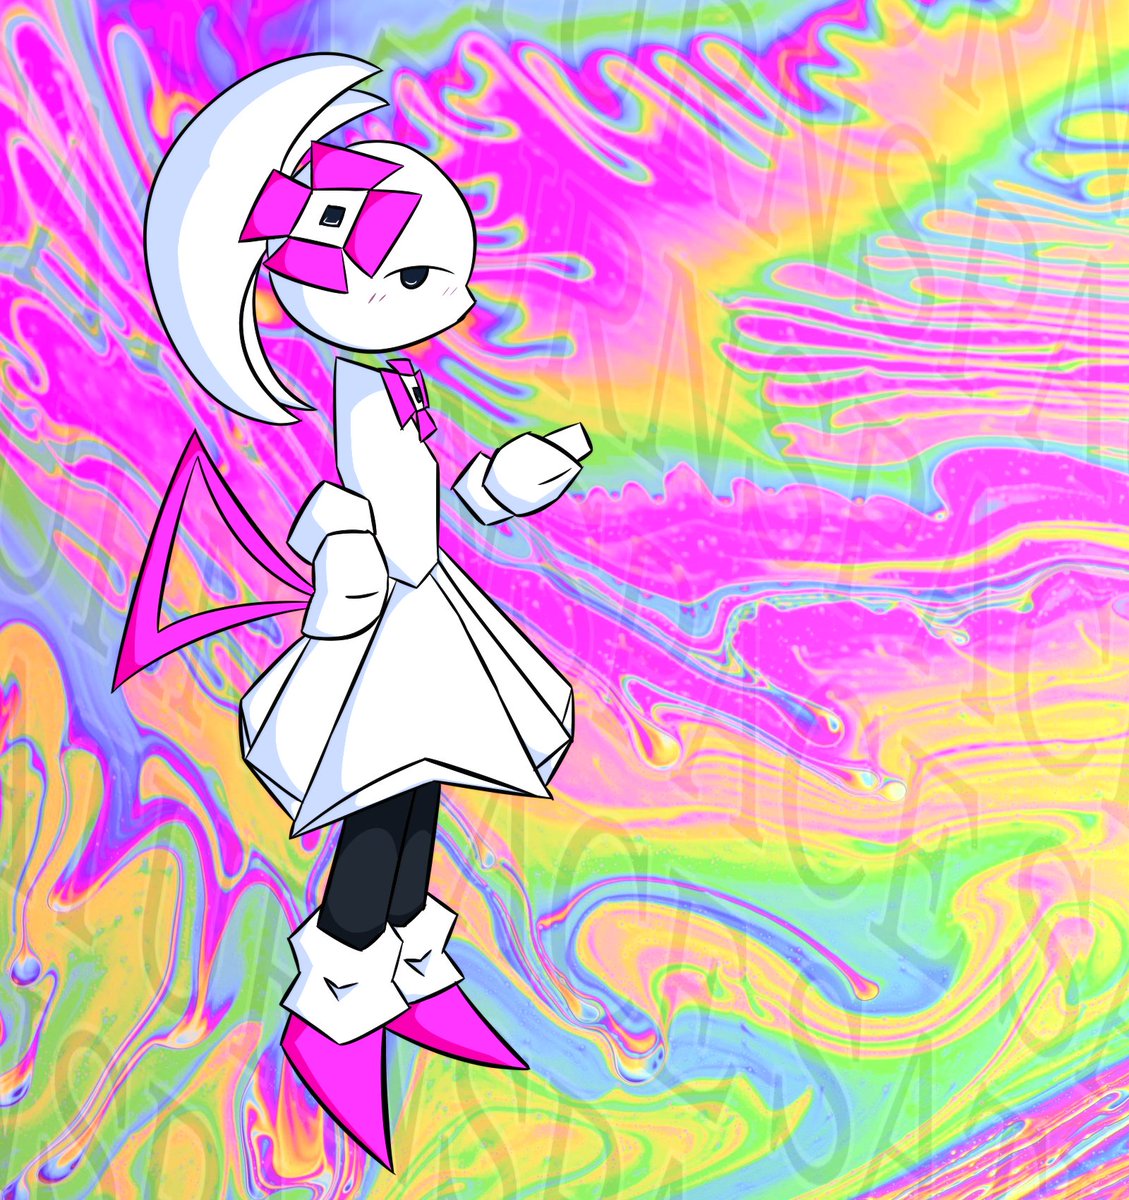 'WELCOME TO THE SATURNSPACE' Dreamcast by @QuitoMonkey (also follow them!! they are one of the most underrated artists i know)